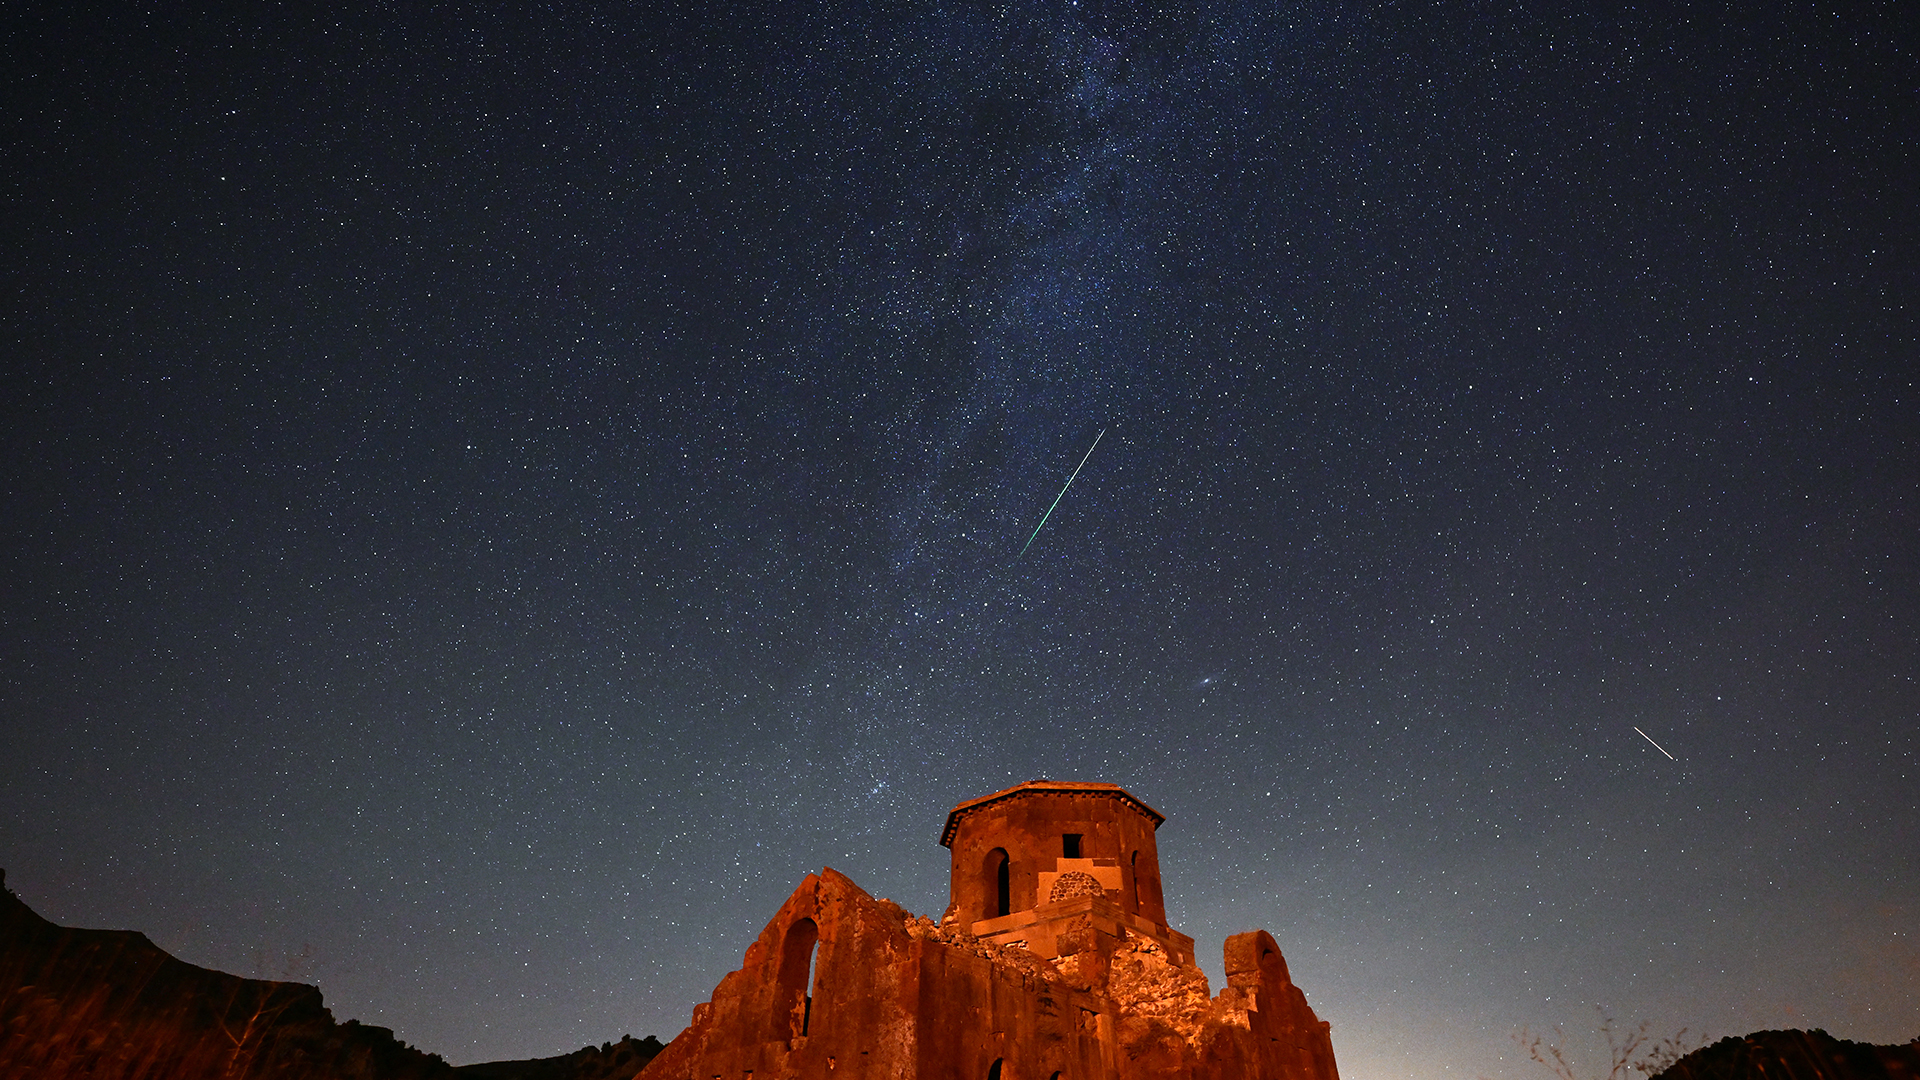 Perseid meteor shower is observed over Red Church and Guzelyurt Monastery Valley.